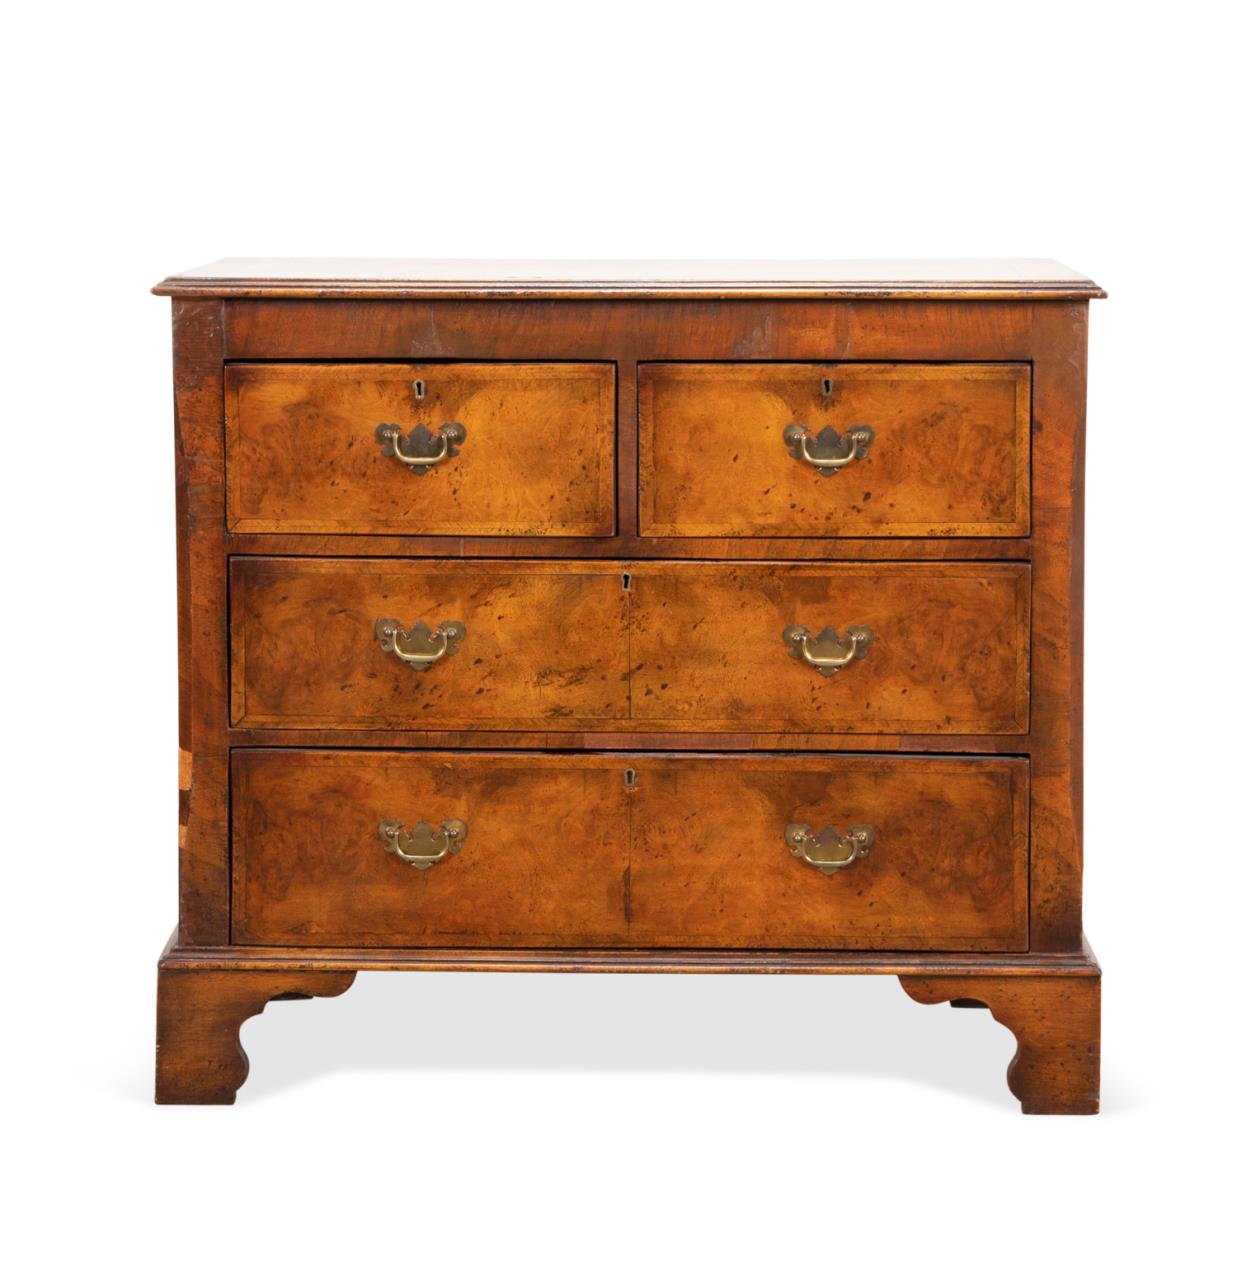 CHIPPENDALE STYLE WALNUT CHEST